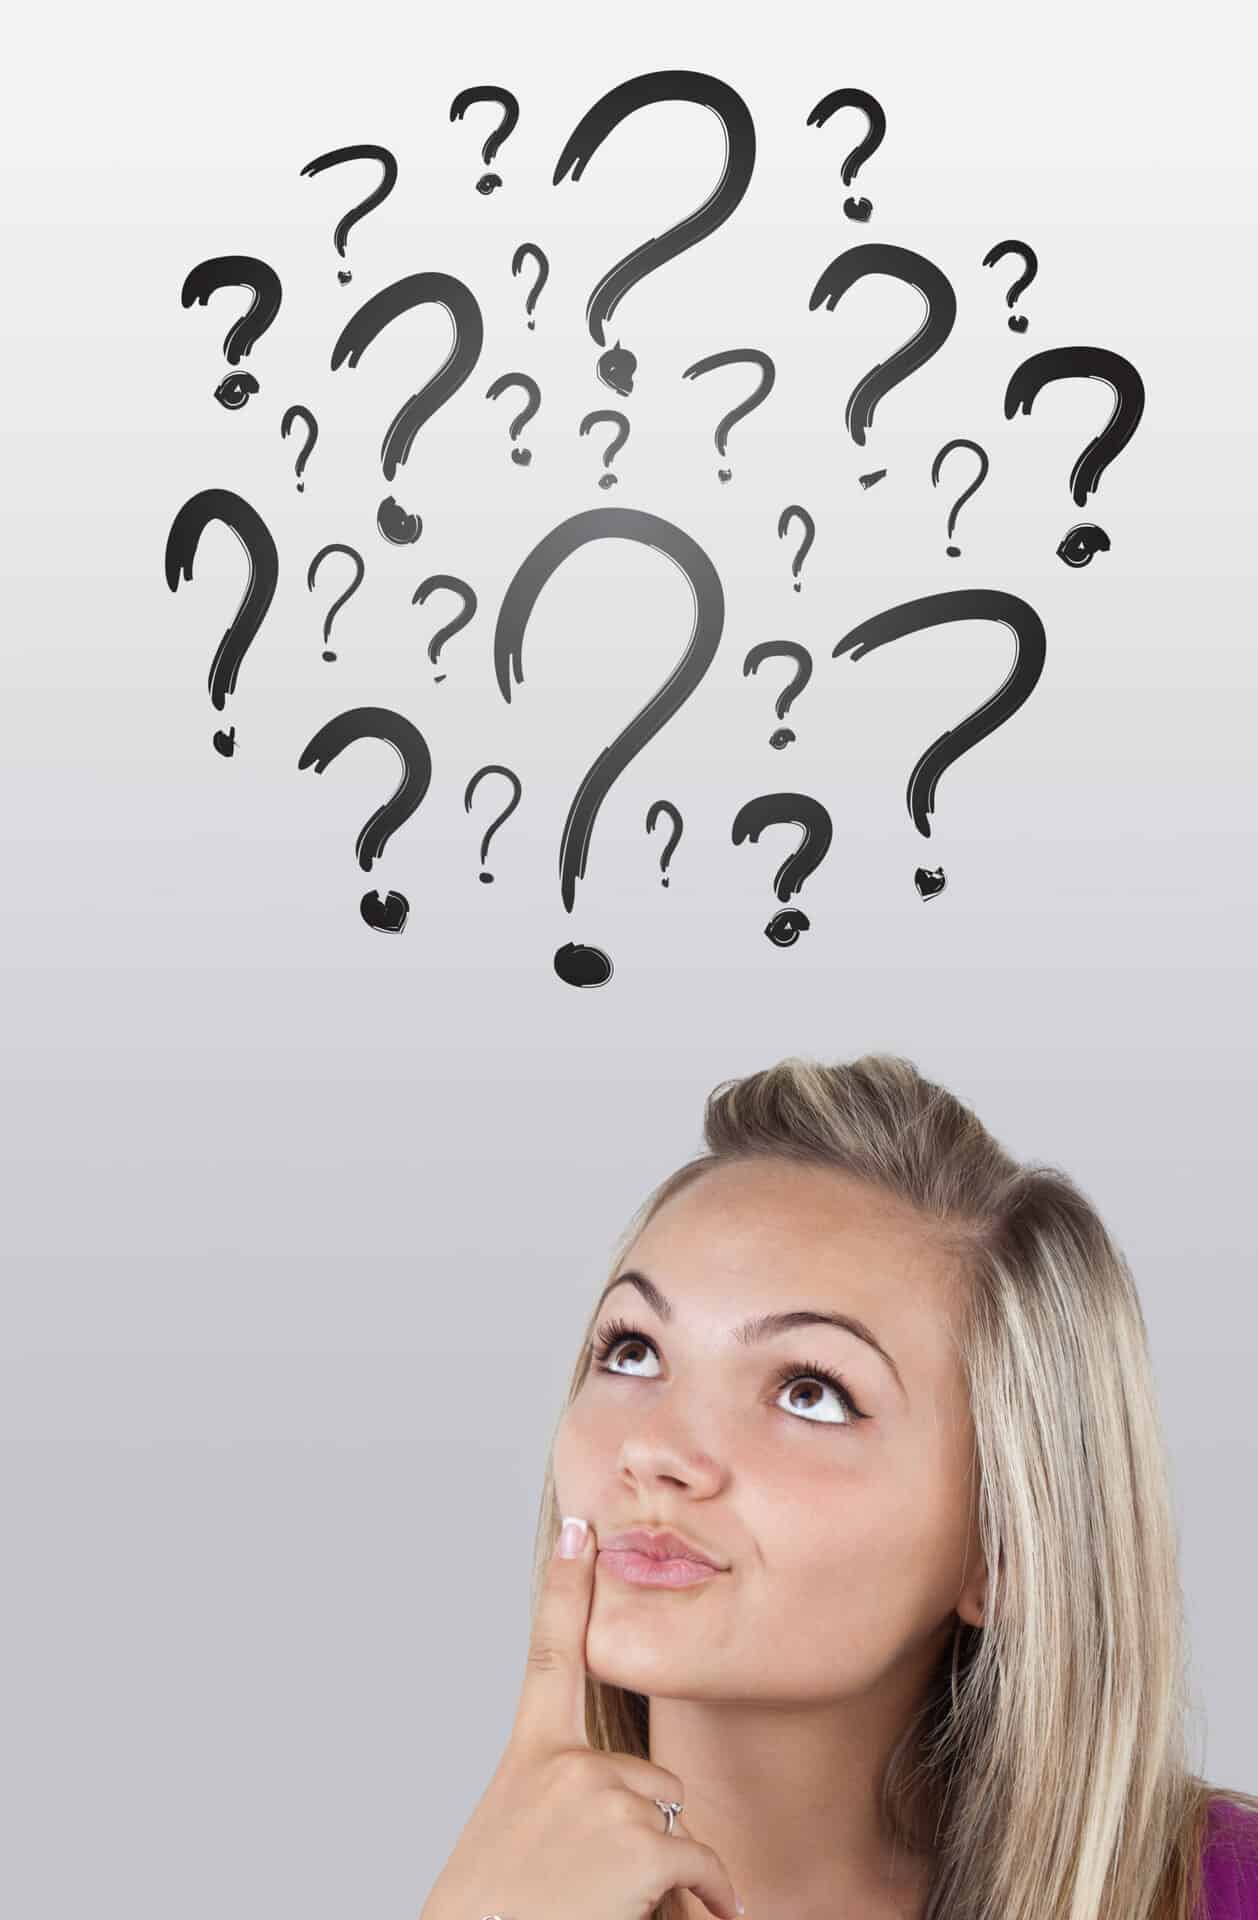 A woman looking up at question marks above her head.